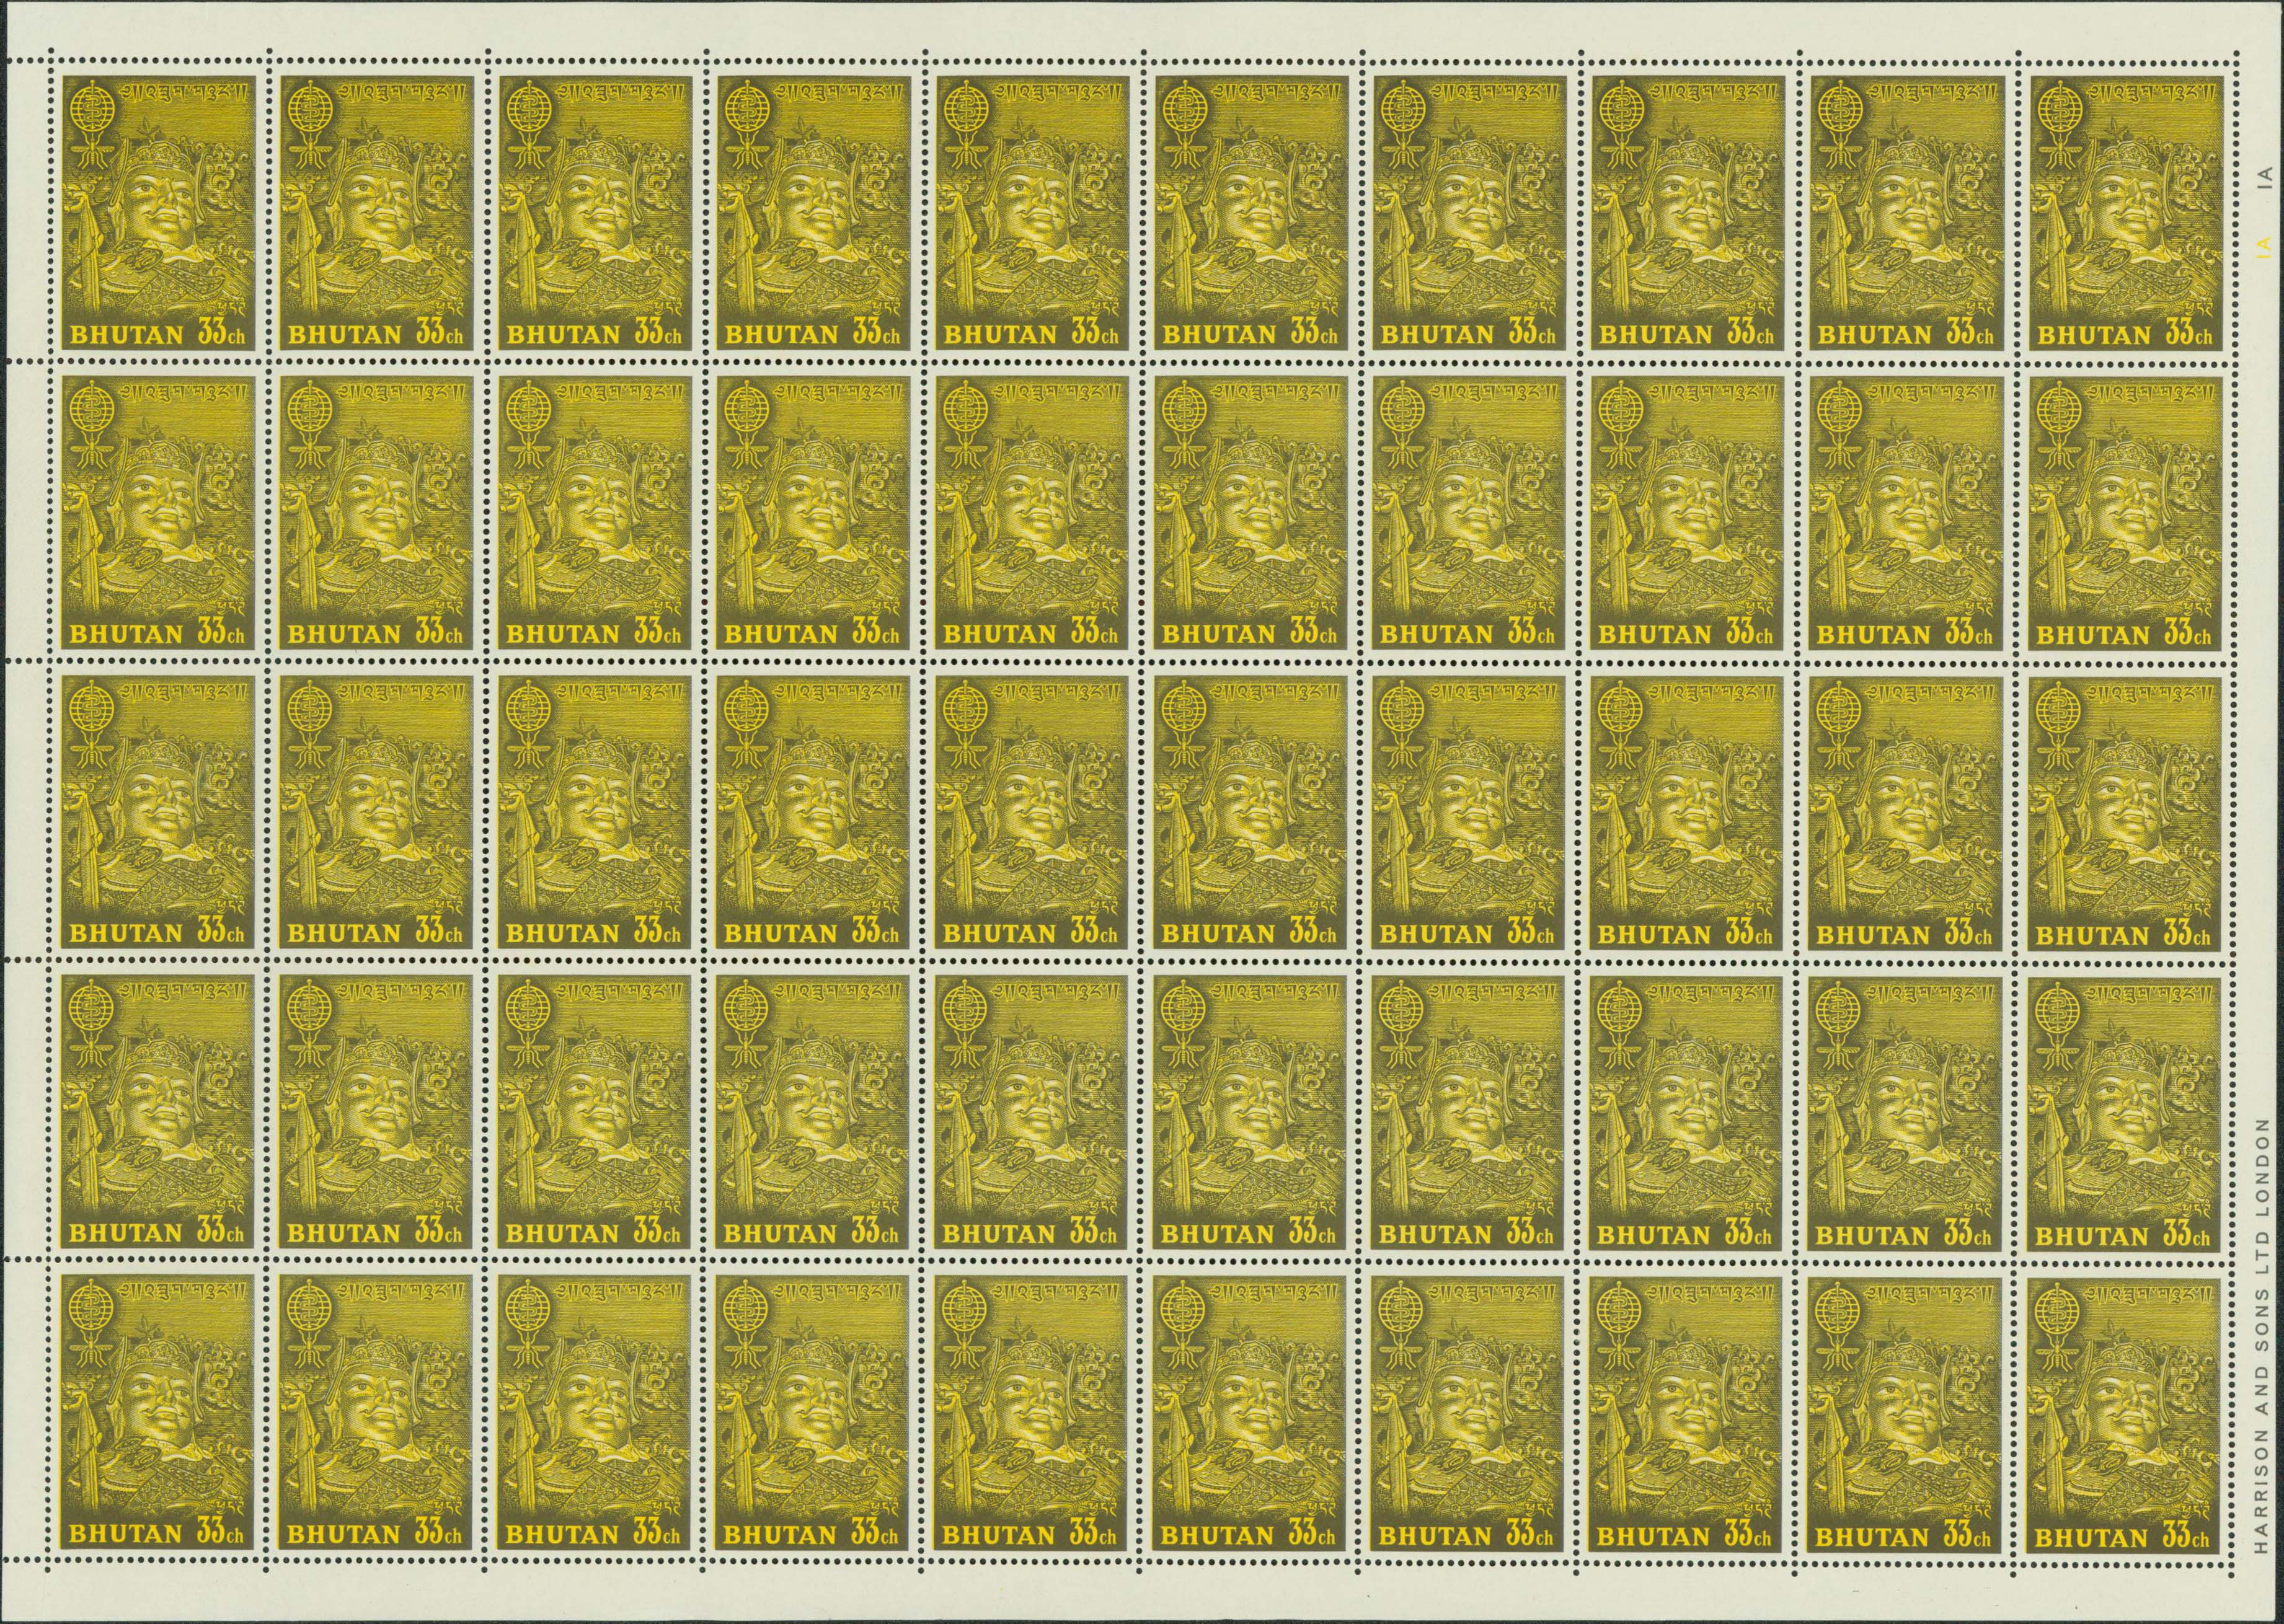 1962%20Unissued%20Anti-Malaria%2033ch%20Guru%20Rinpoche%20sheet%20in%20the%20planned%20colors